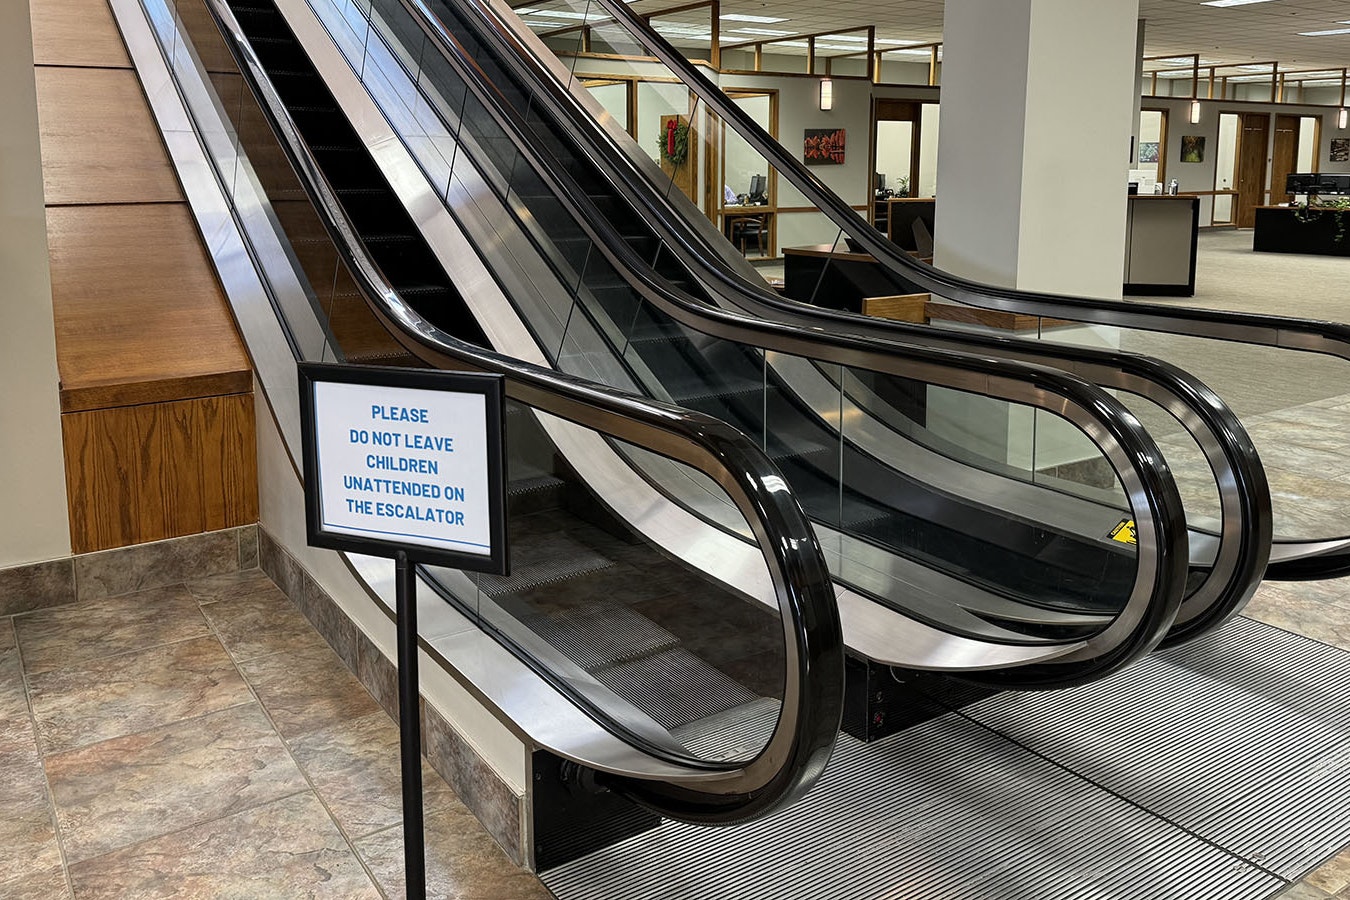 The escalators in the main branch of Hilltop Bank in Casper. These escalators (the most recently built in Wyoming) were installed when the bank building opened in 1979.